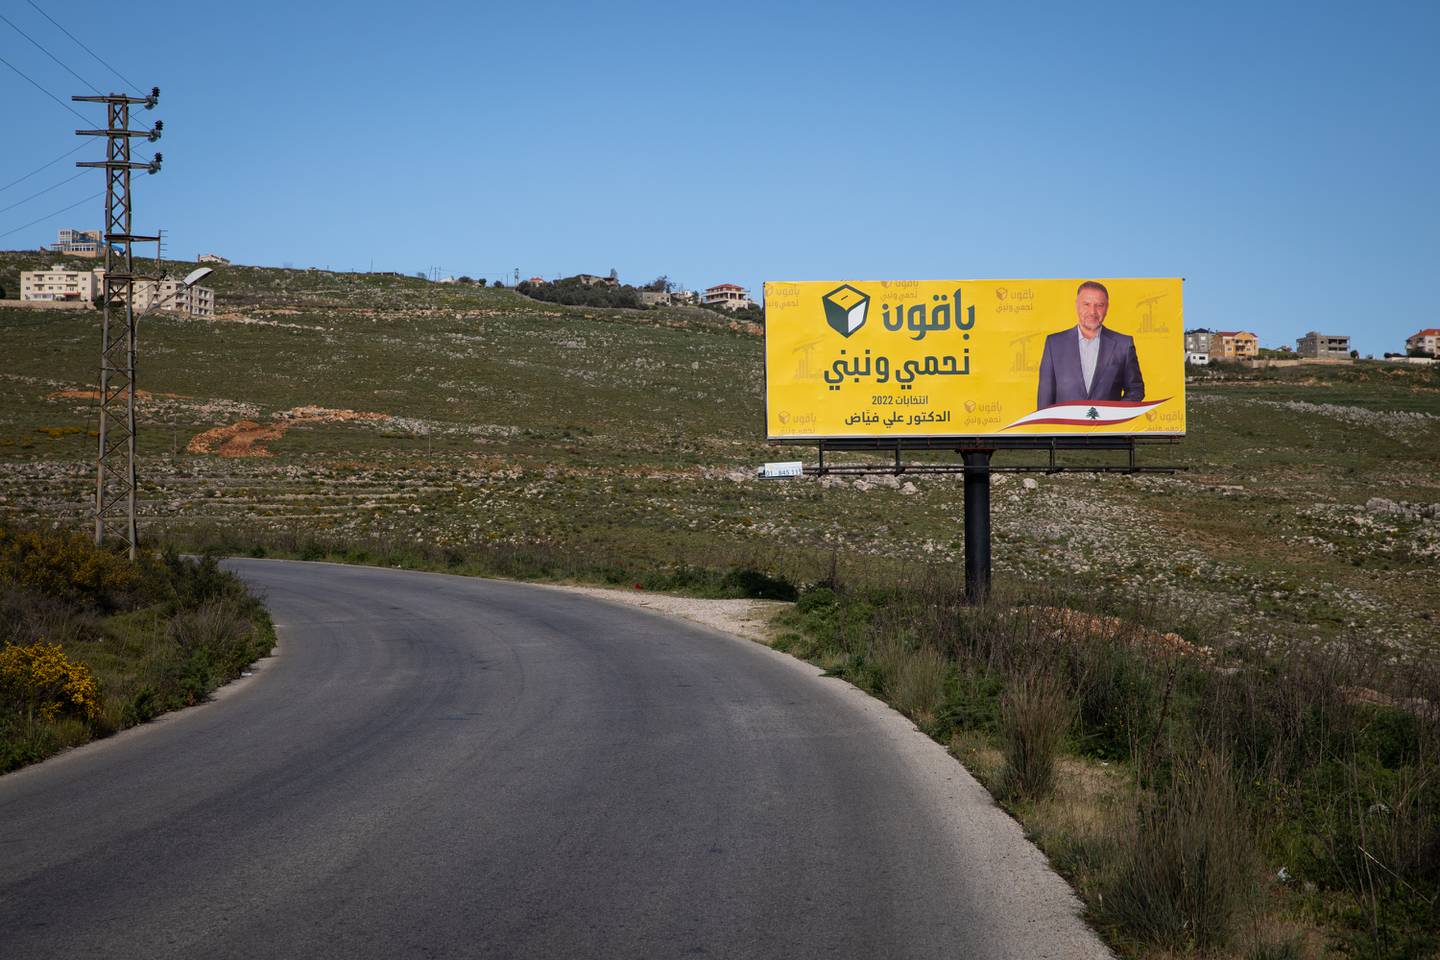 A campaign poster for Hezbollah MP Ali Fayyad lines the road near Marjayoun in southern Lebanon. Oliver Marsden